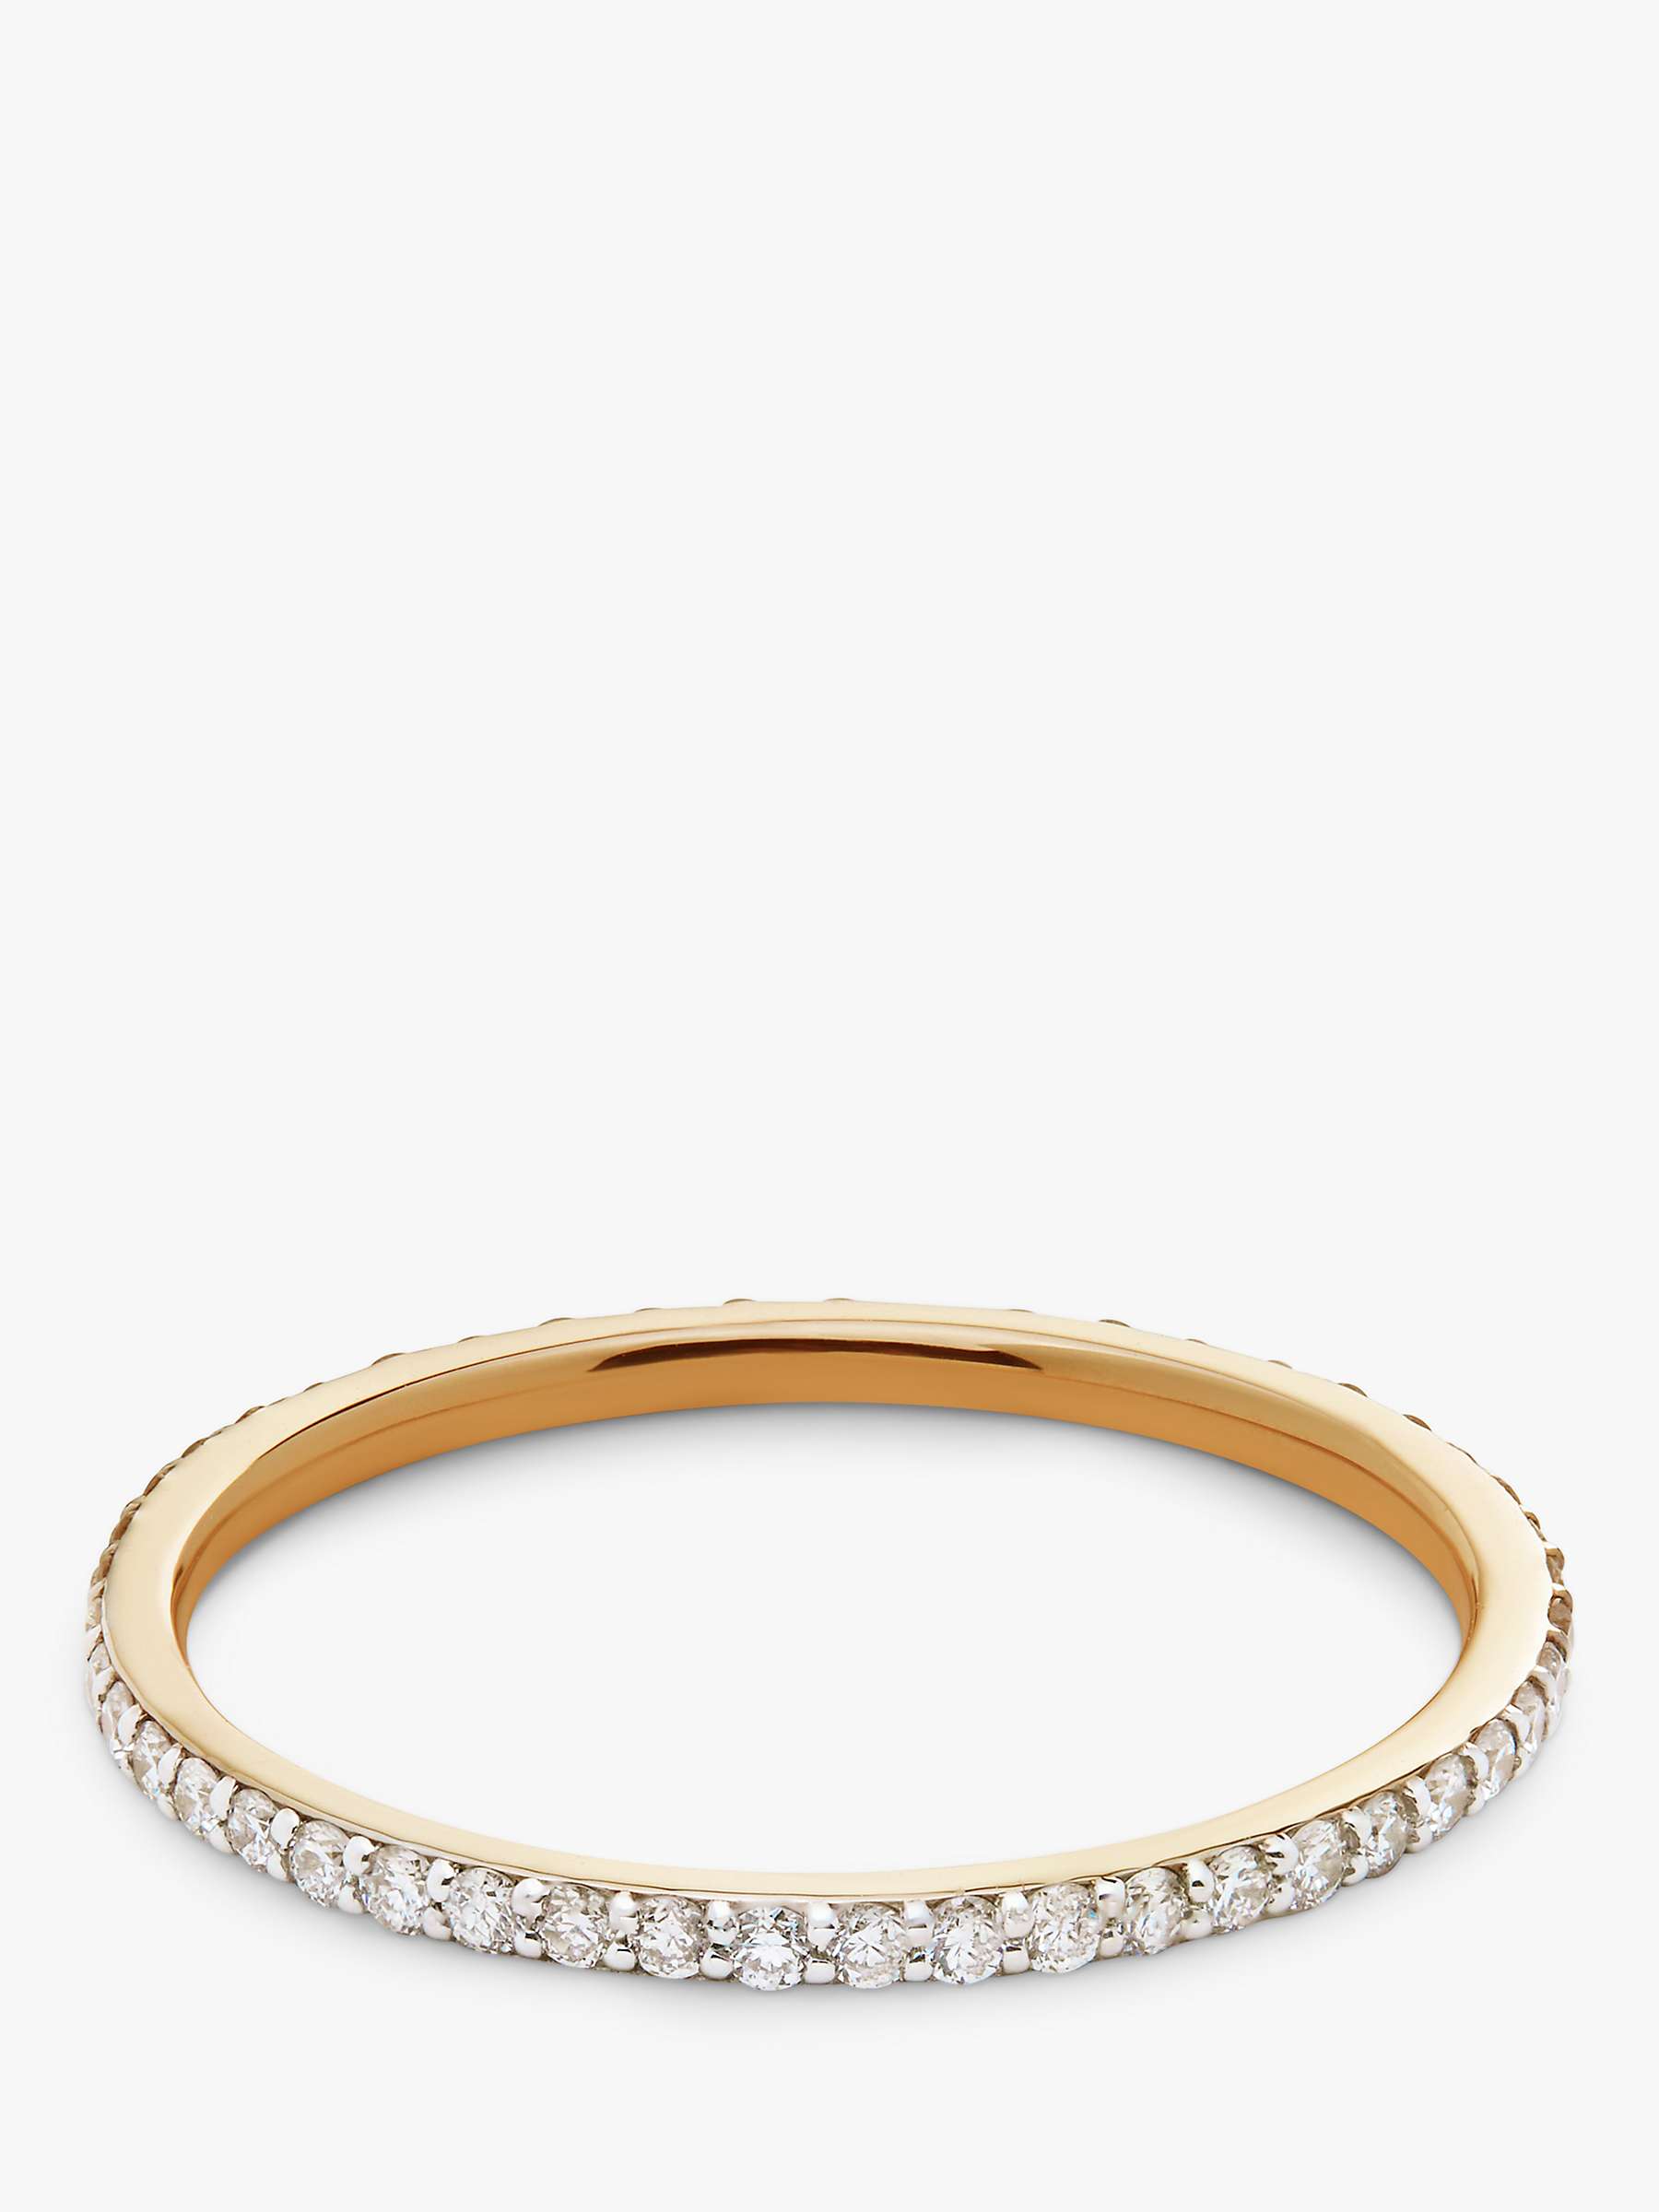 Buy Monica Vinader 14ct Yellow Gold Diamond Eternity Ring, Gold Online at johnlewis.com